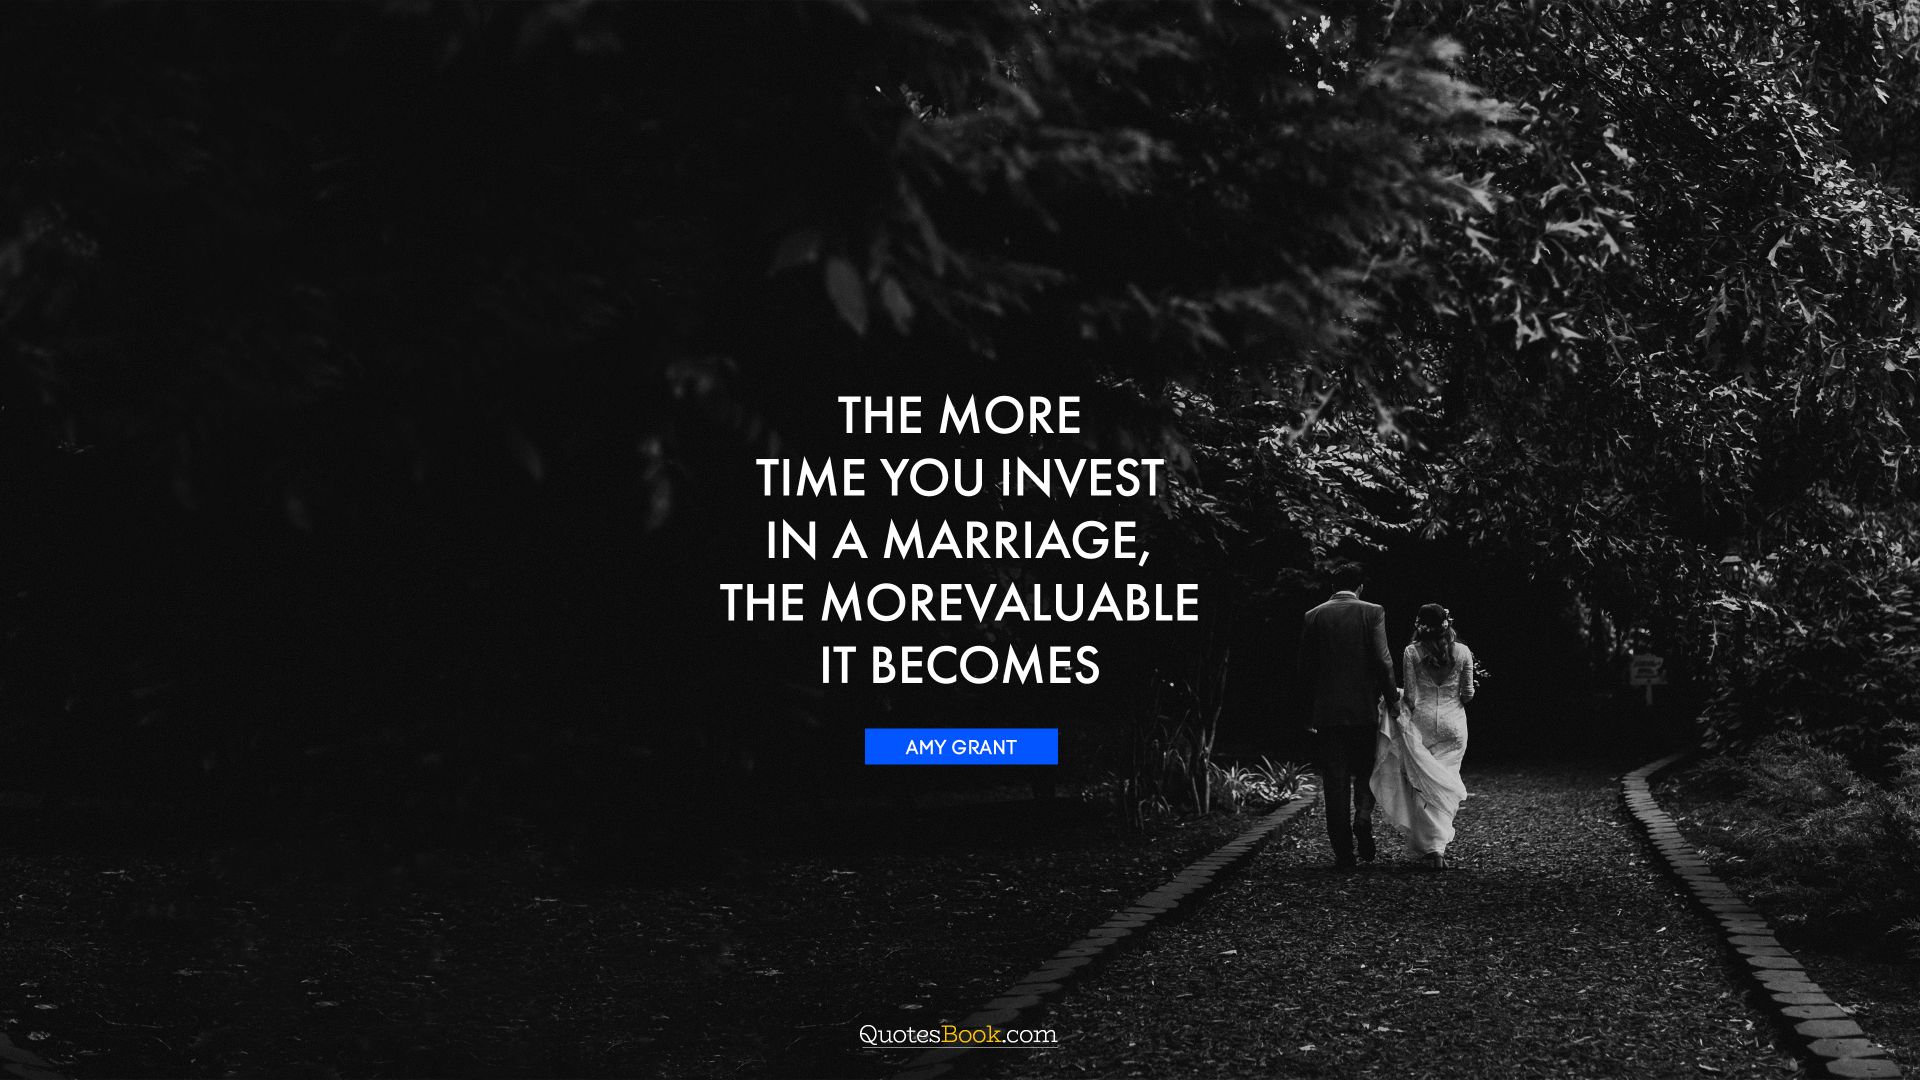 The more time you invest in a marriage, the more valuable it becomes. - Quote by Amy Grant